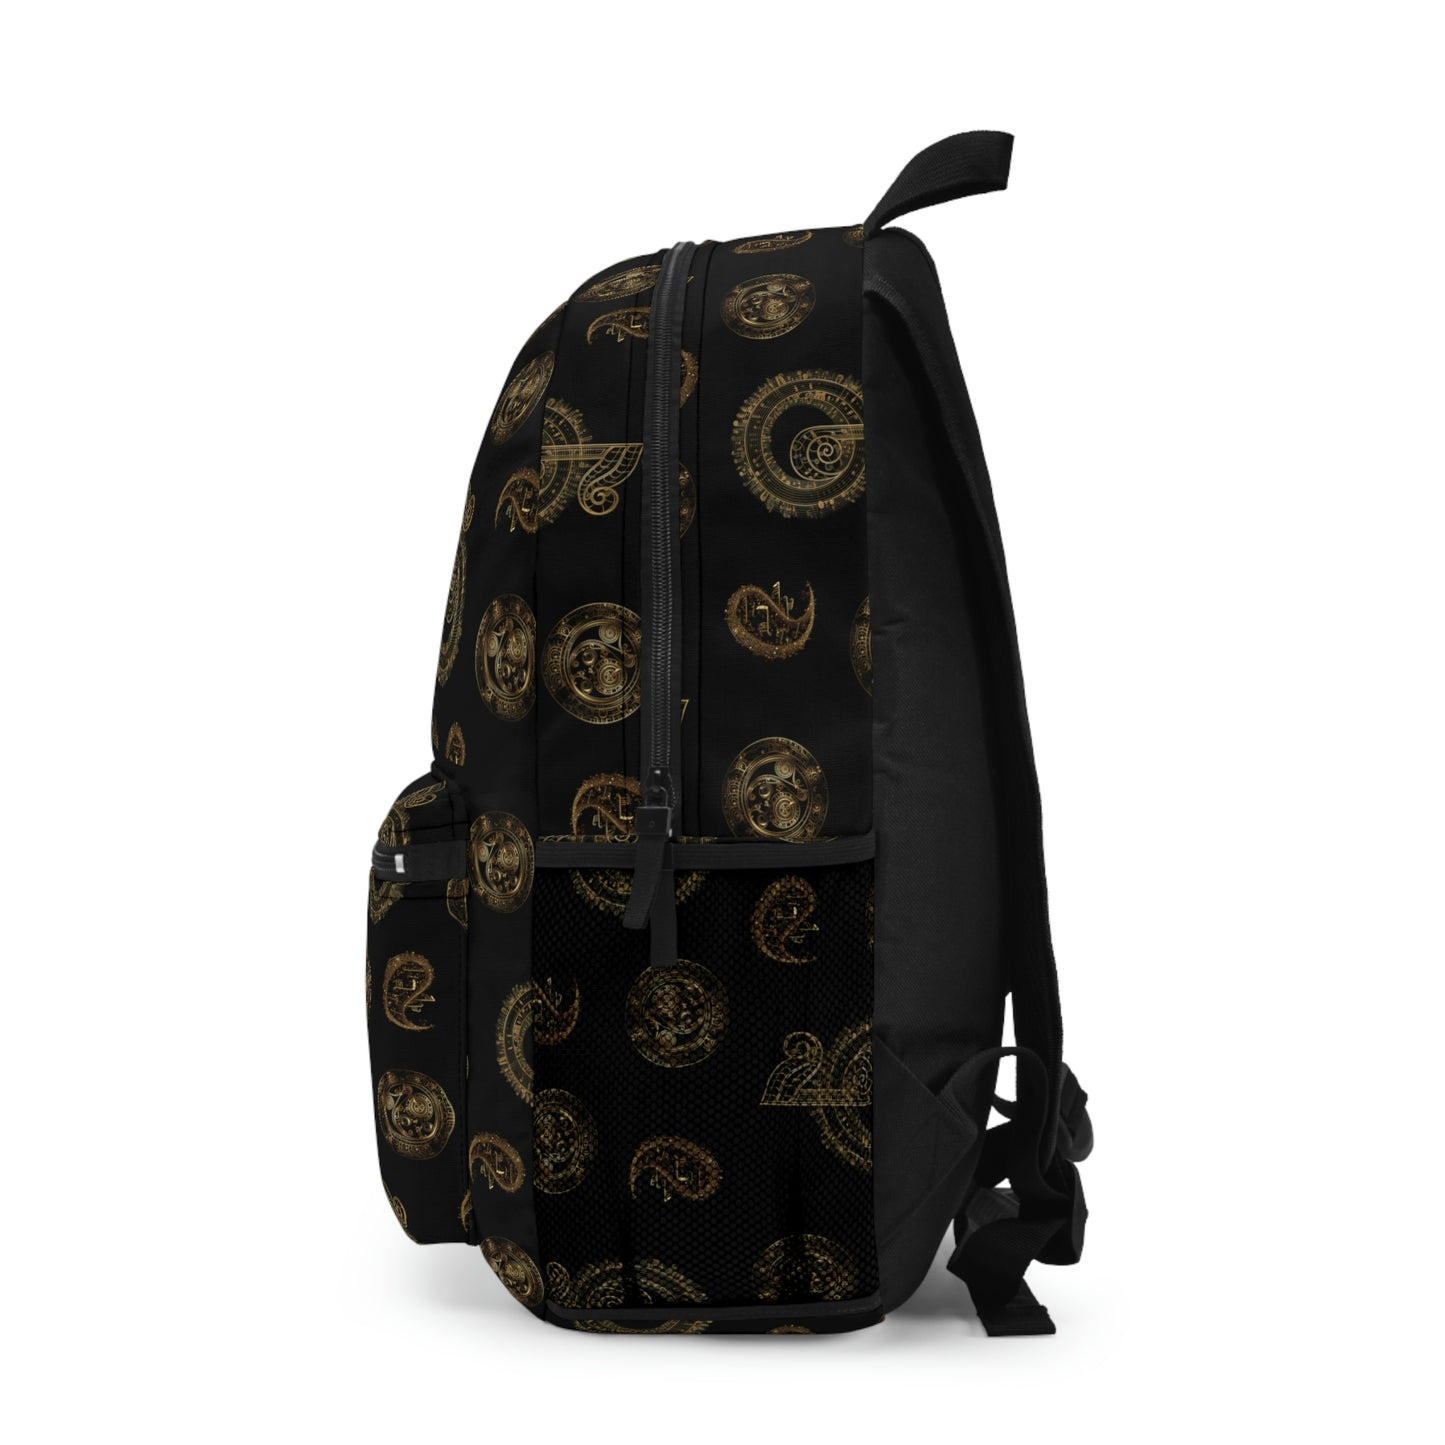 Opus Gold - Music Themed Backpack